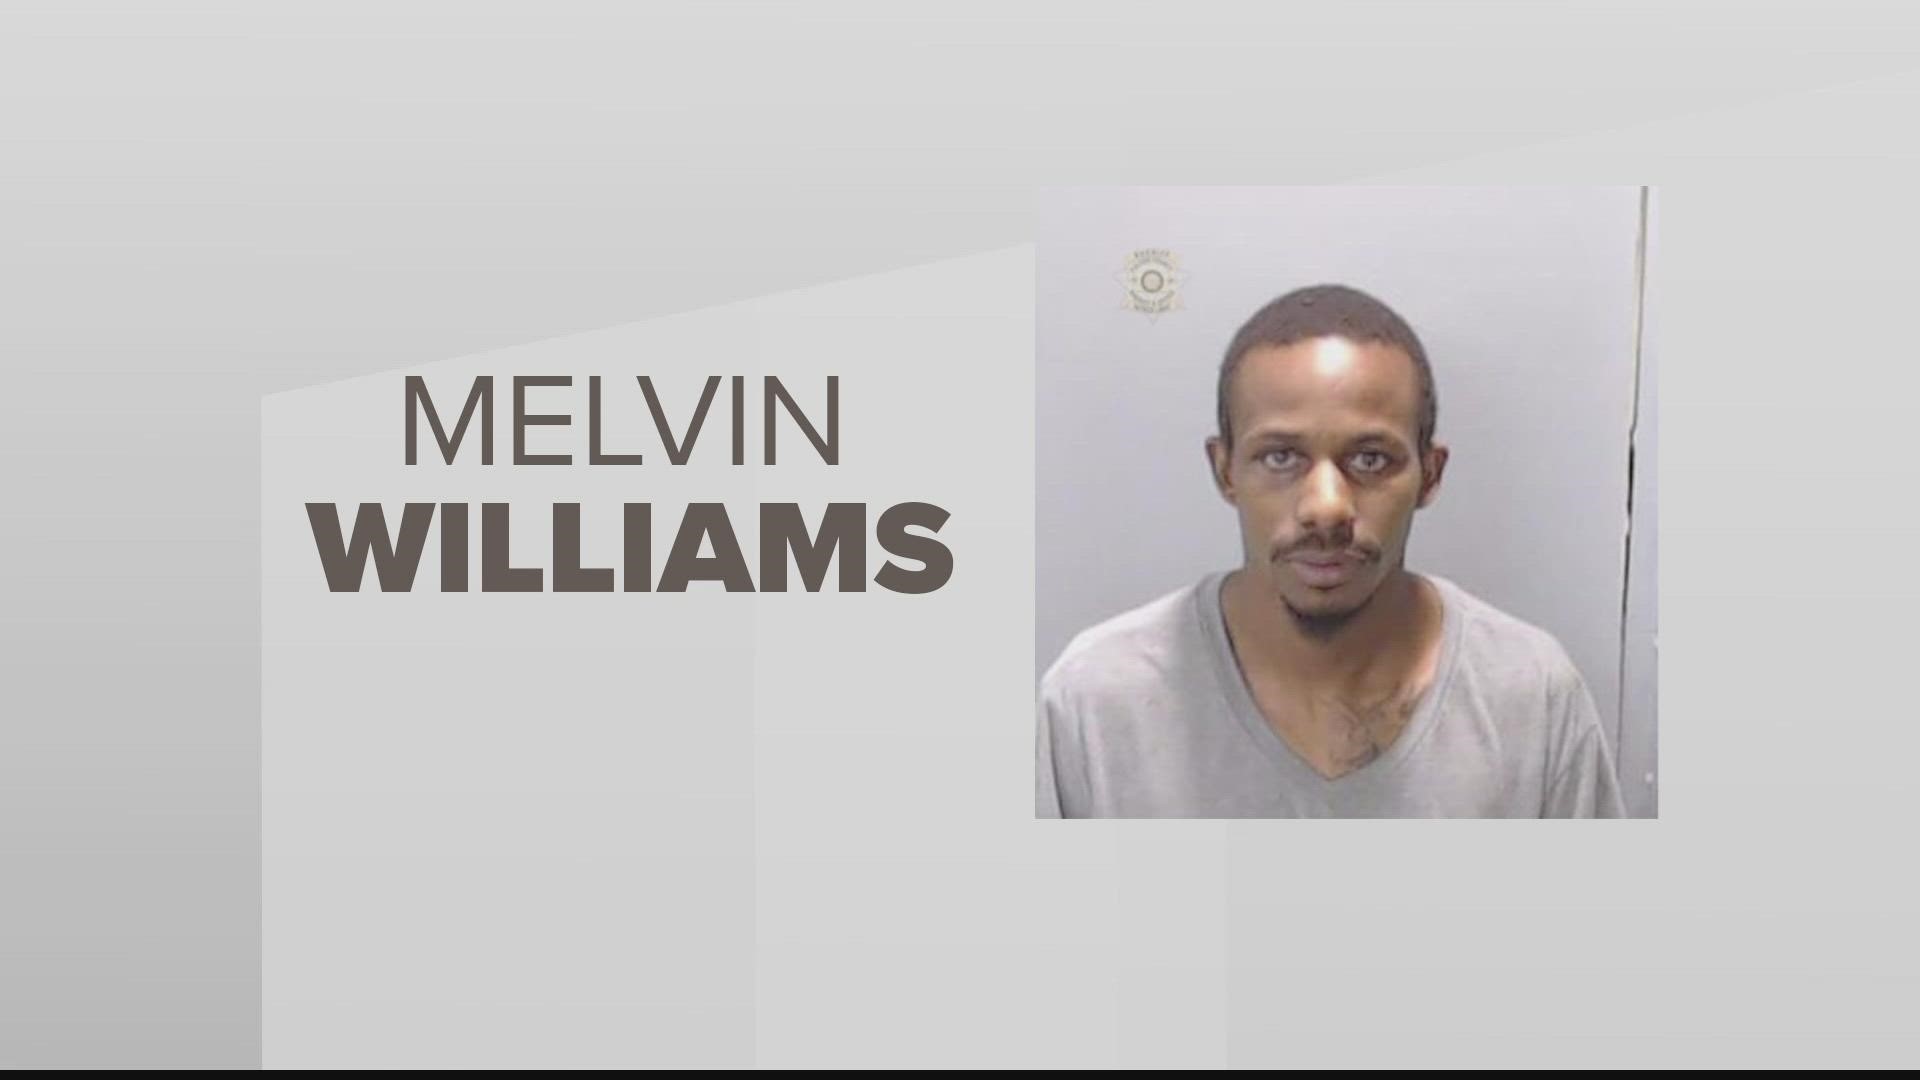 According to the warrants, the suspect is 36-year-old Melvin Williams of Atlanta.